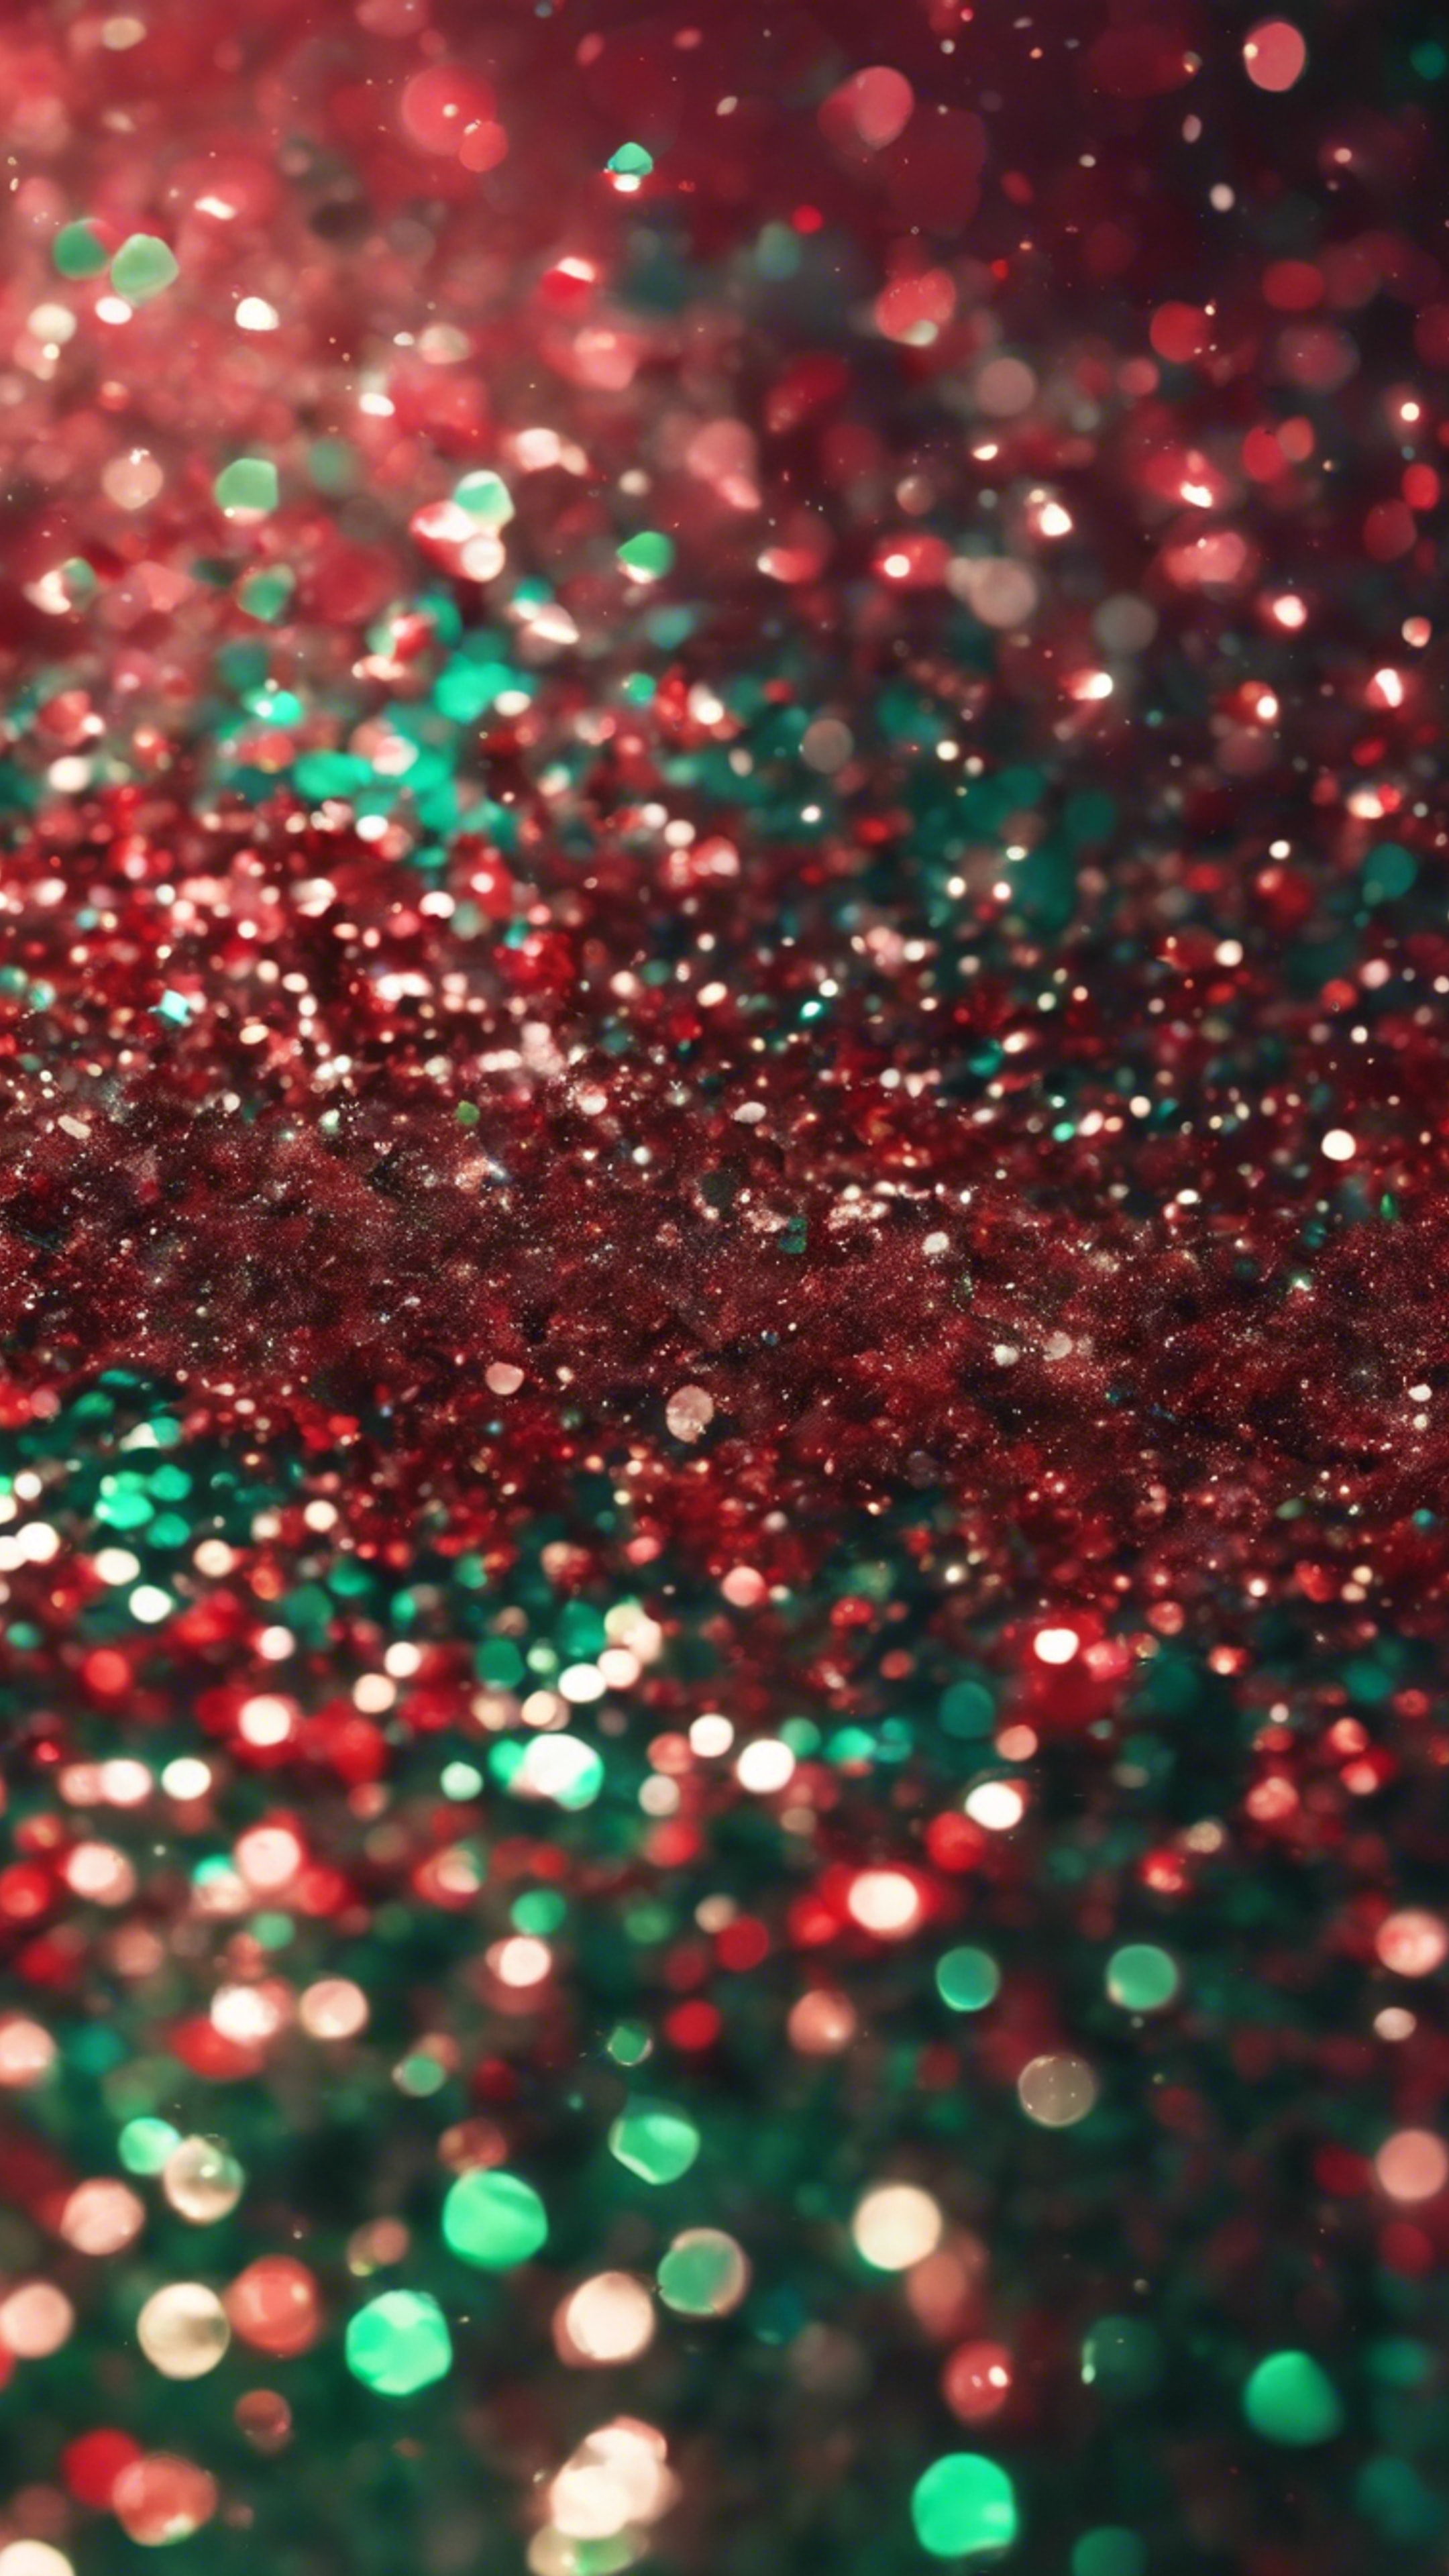 A mix of large and small particles of red and green glitter Wallpaper[305fad2da0d041f9bf26]